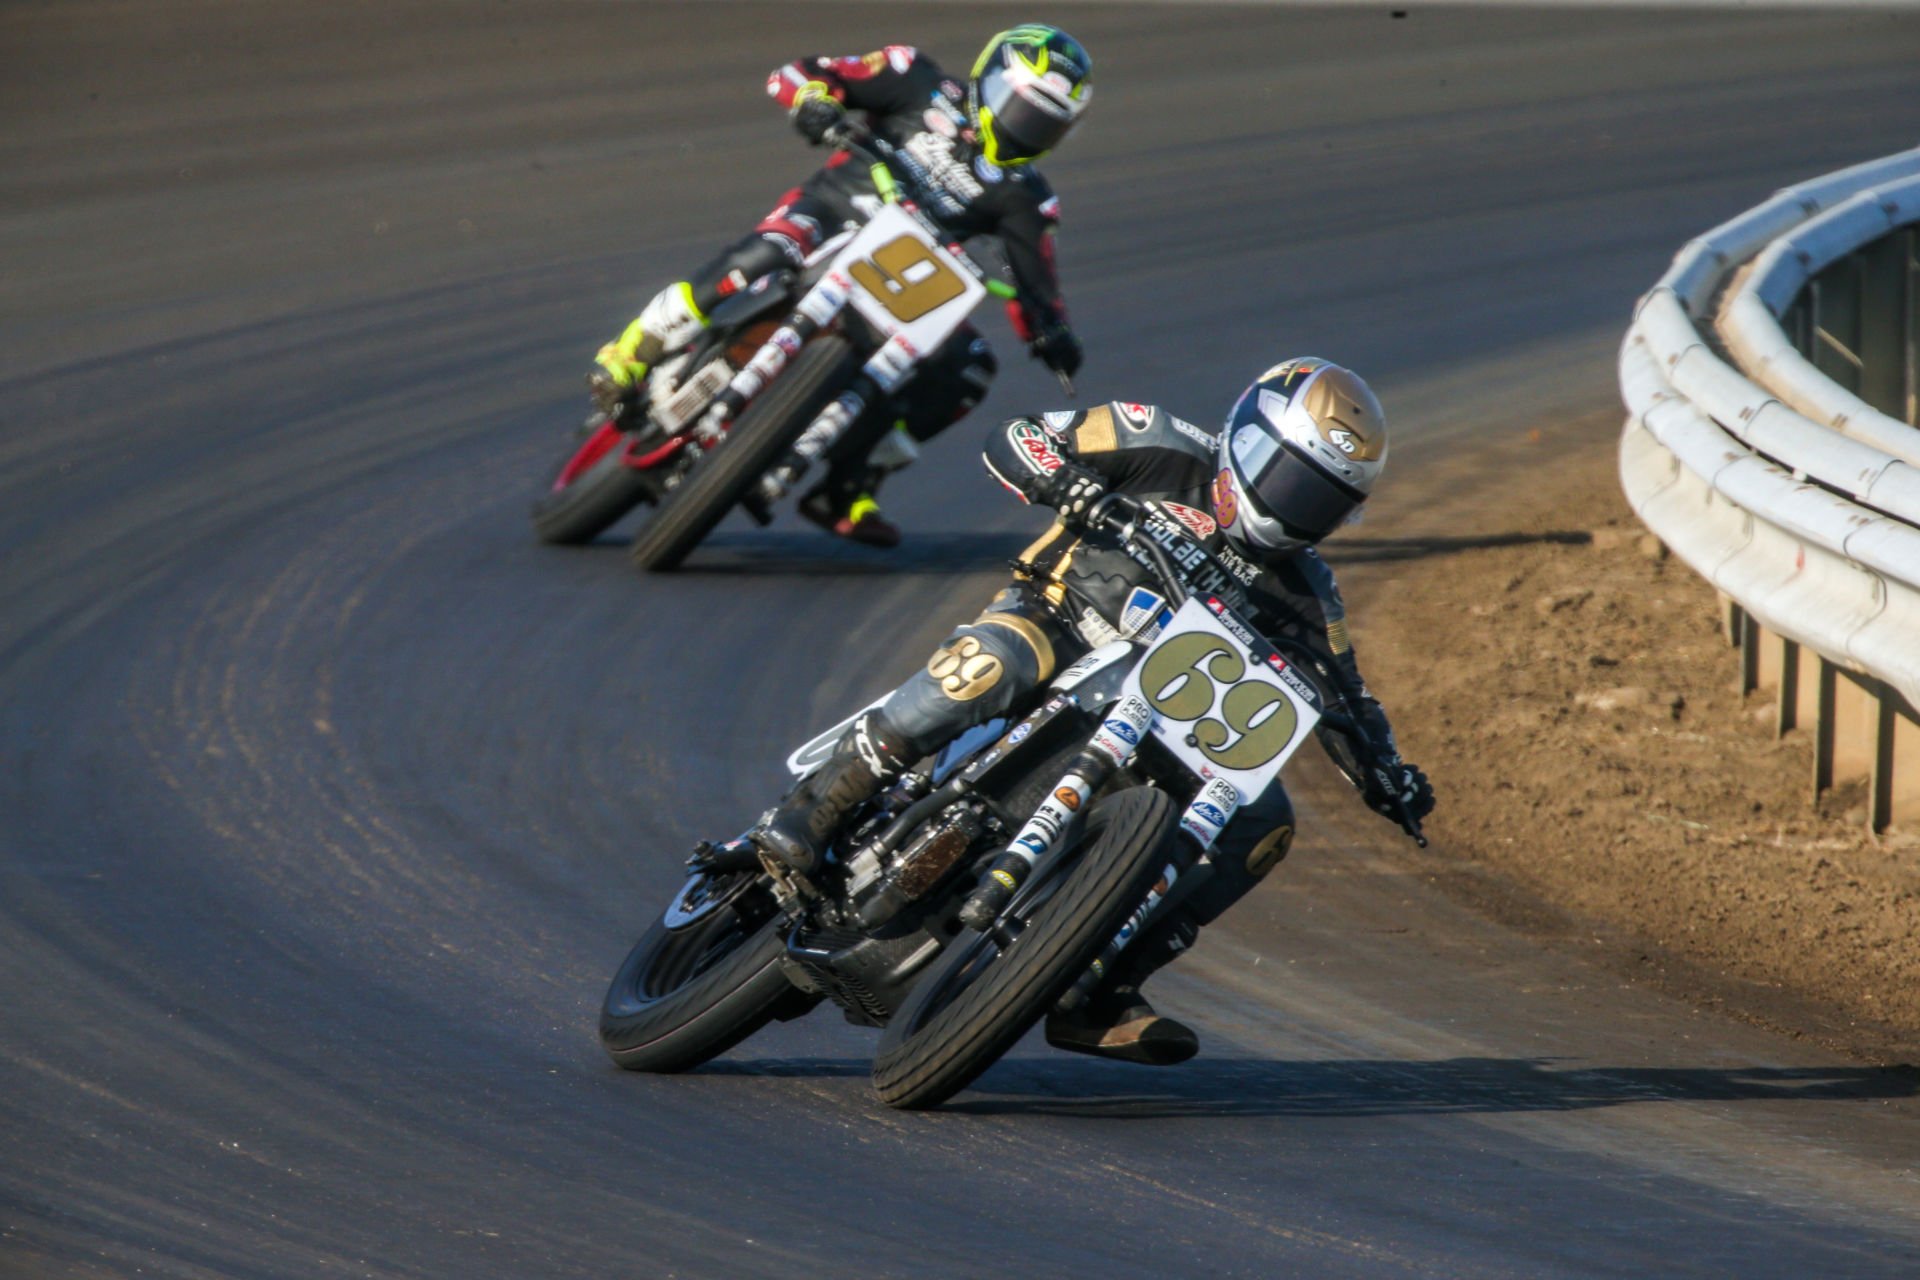 Sammy Halbert (69) leads Jared Mees (9) during the AFT SuperTwins race at Springfield Mile I. Photo by Scott Hunter, courtesy AFT.